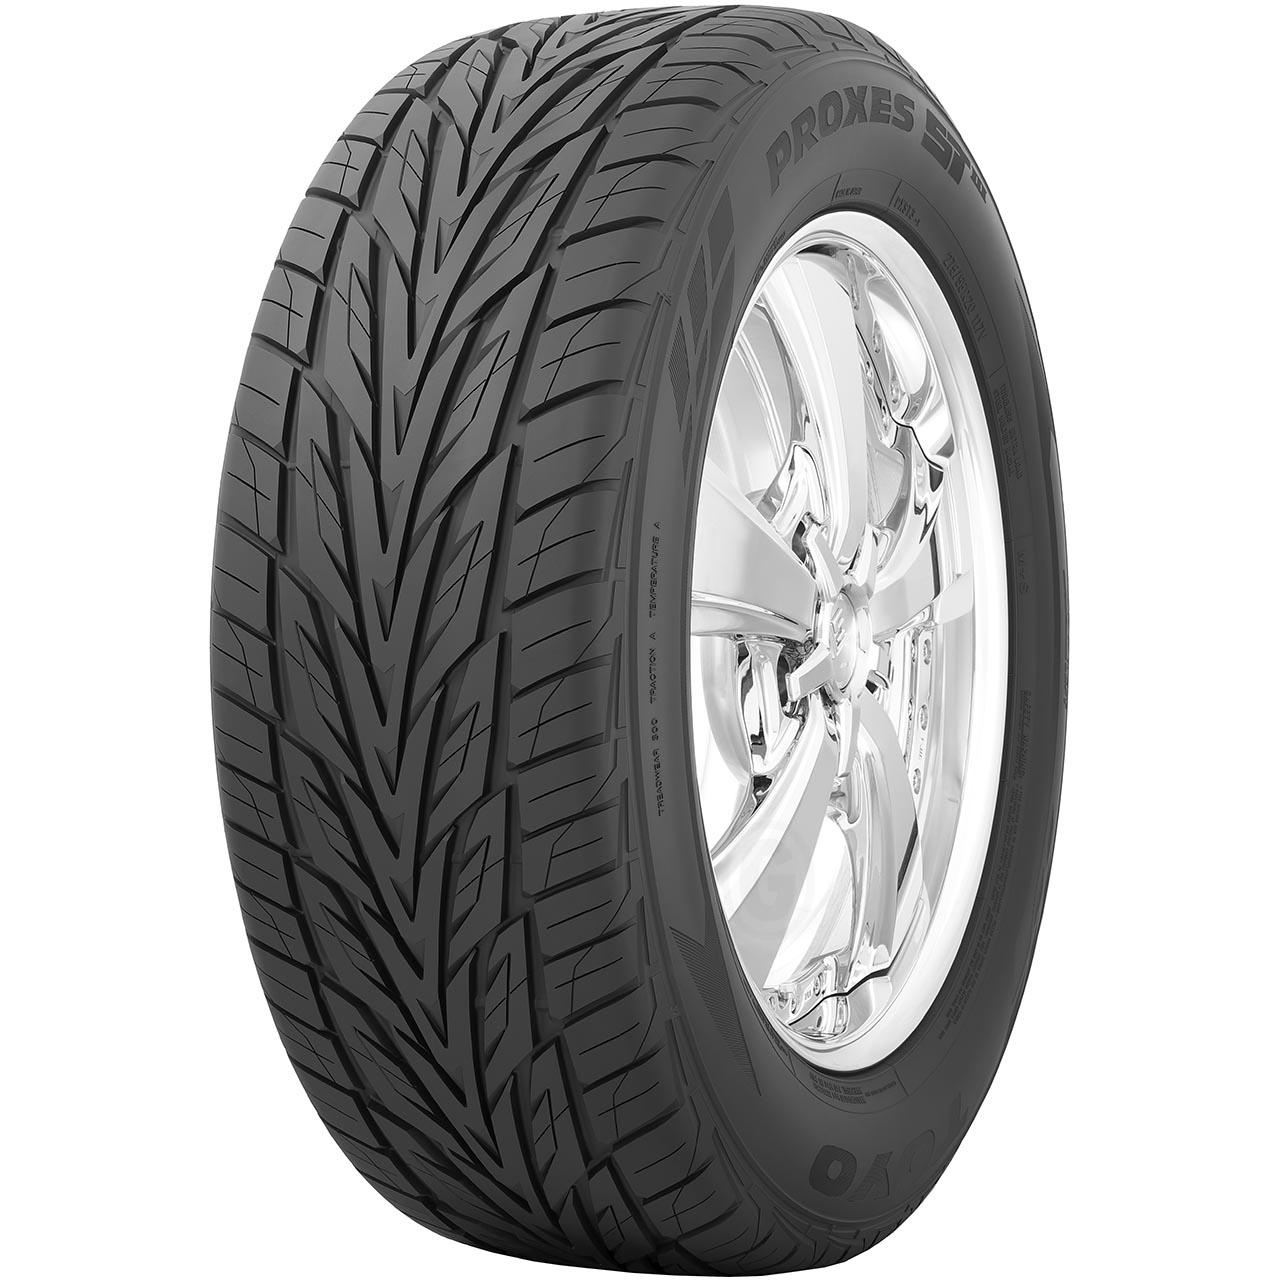 TOYO PROXES S/T III 285/50R20 116V